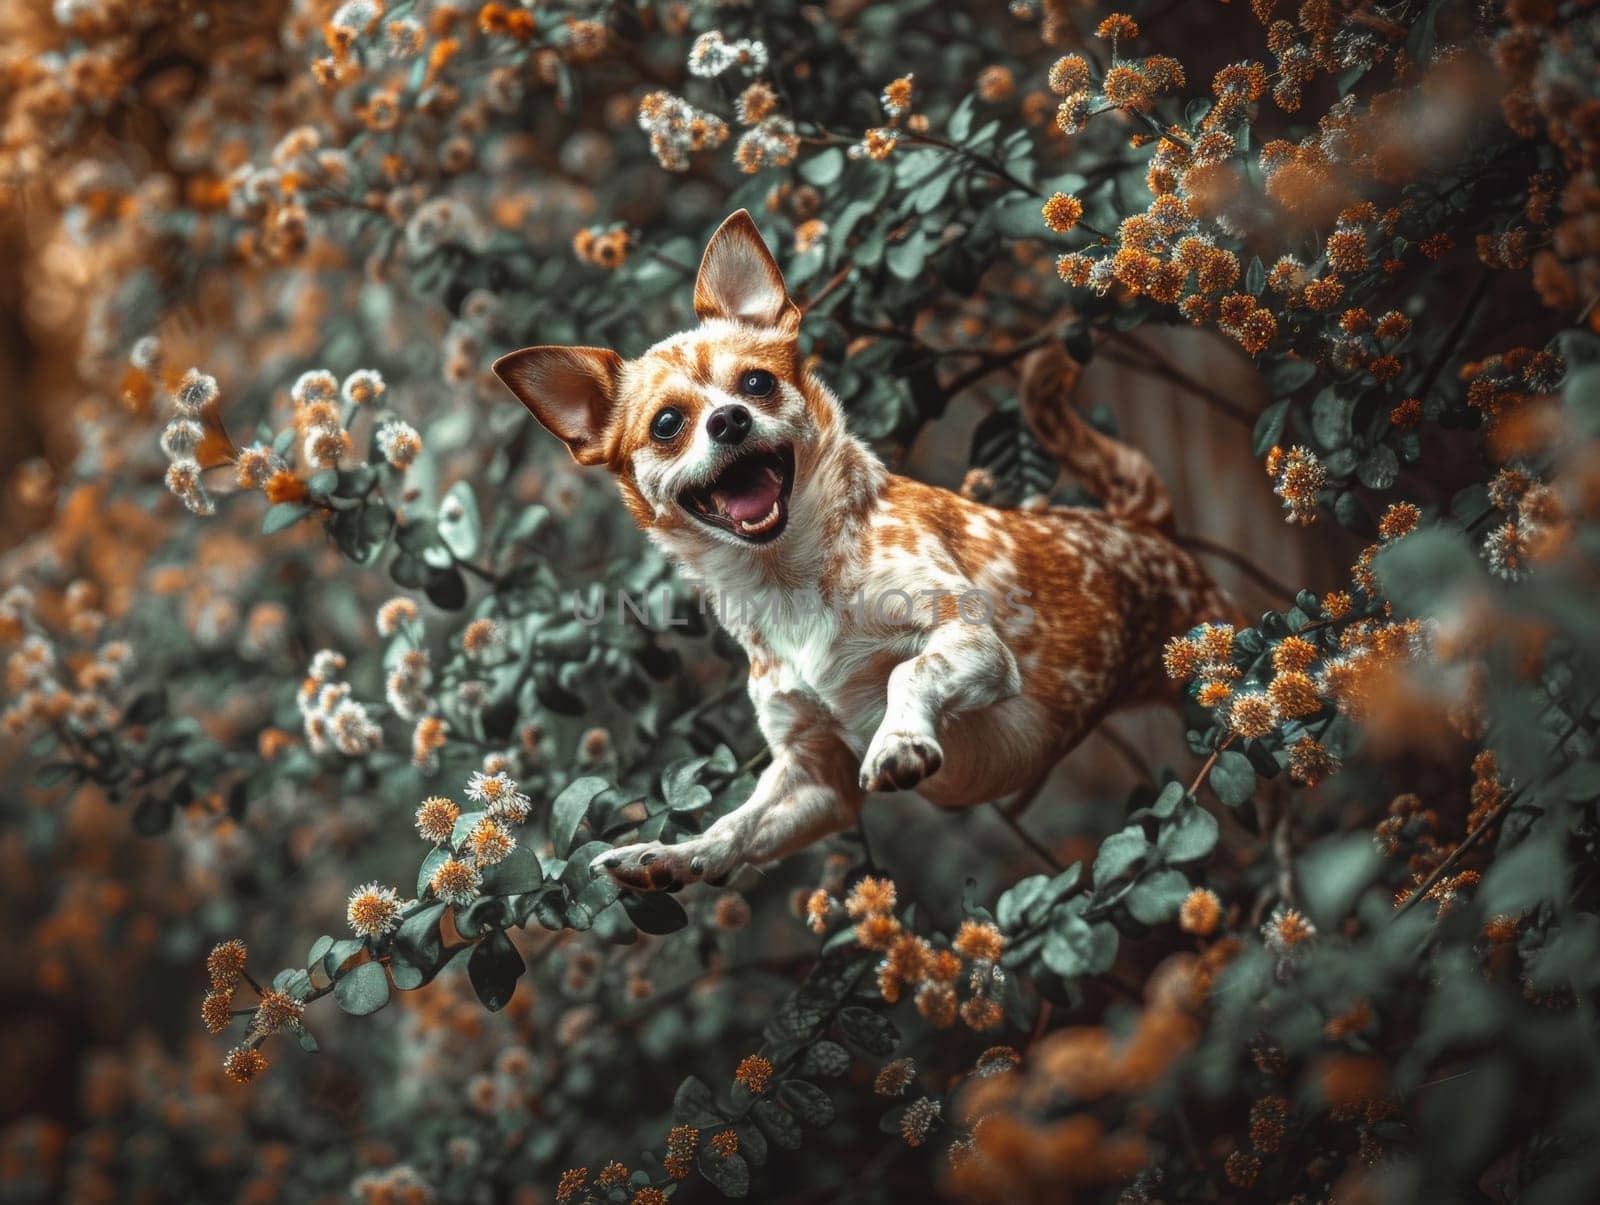 A dog jumping through a bunch of flowers and leaves